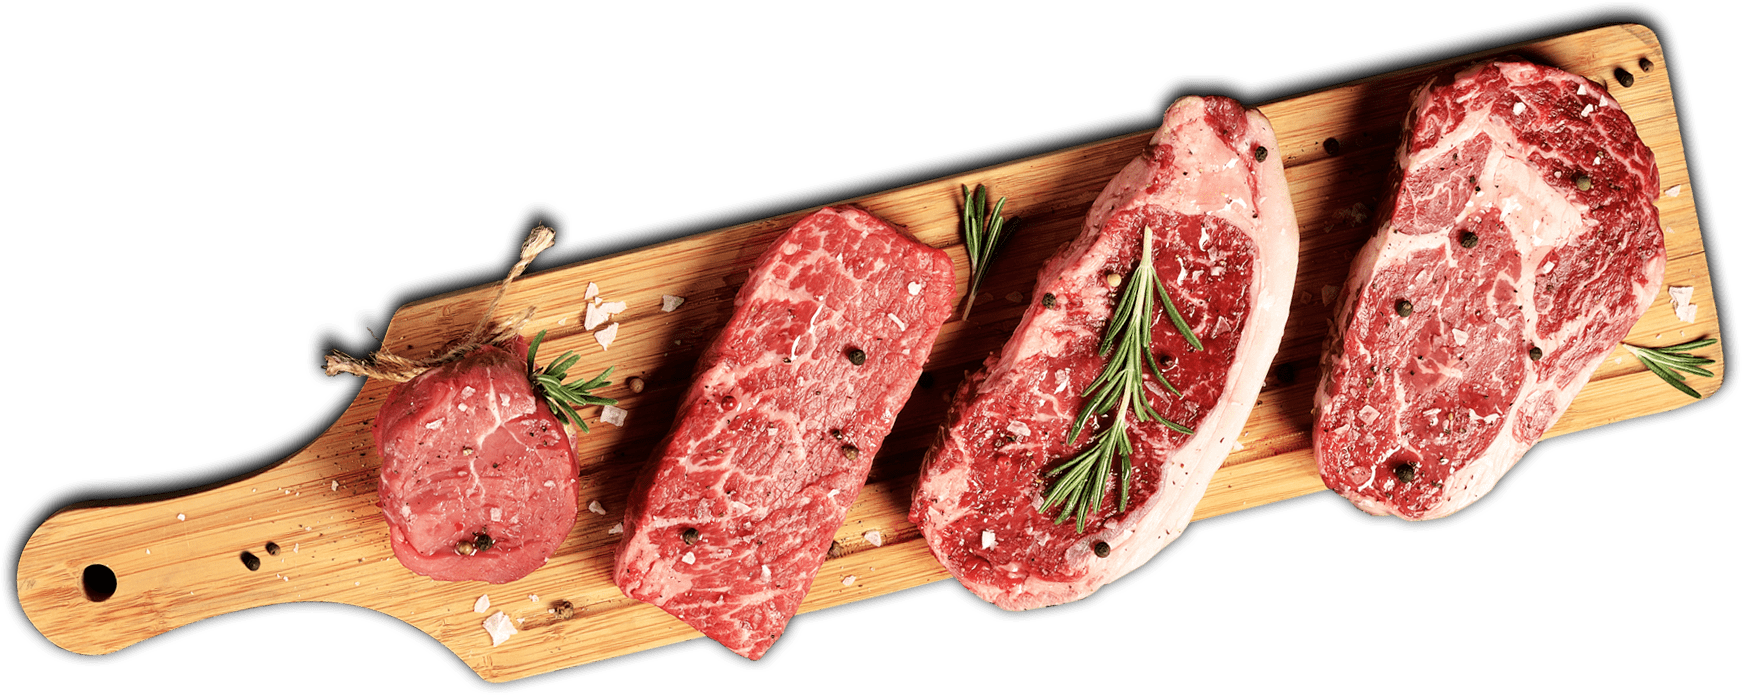 Is It Safe to Refreeze Raw Meat and Poultry that Has Thawed?